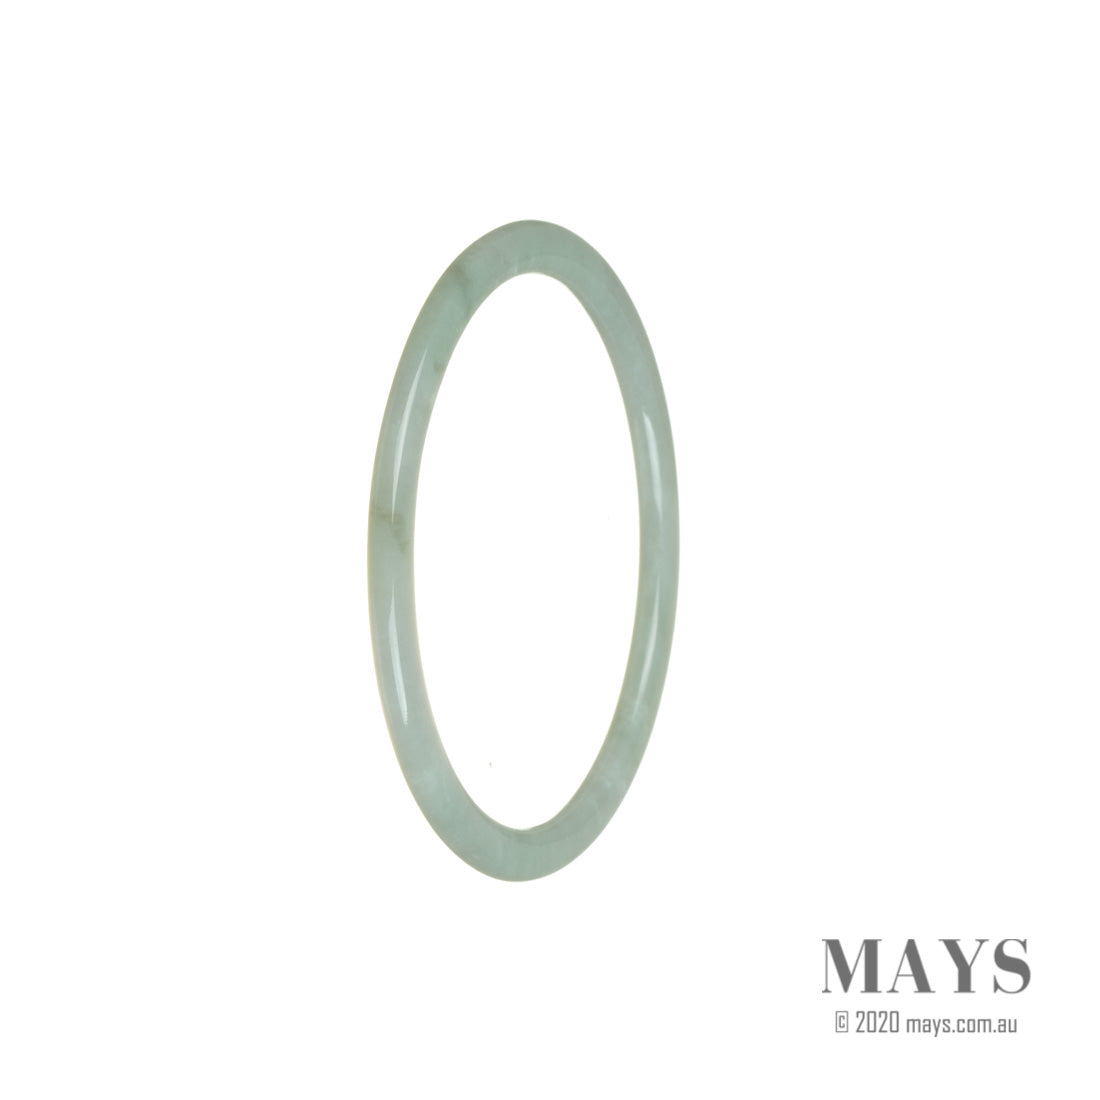 A close-up image of a thin light green jadeite jade bangle bracelet. The bracelet is made of genuine untreated jade and has a 57mm diameter. It is a beautiful piece of jewelry from the brand MAYS.